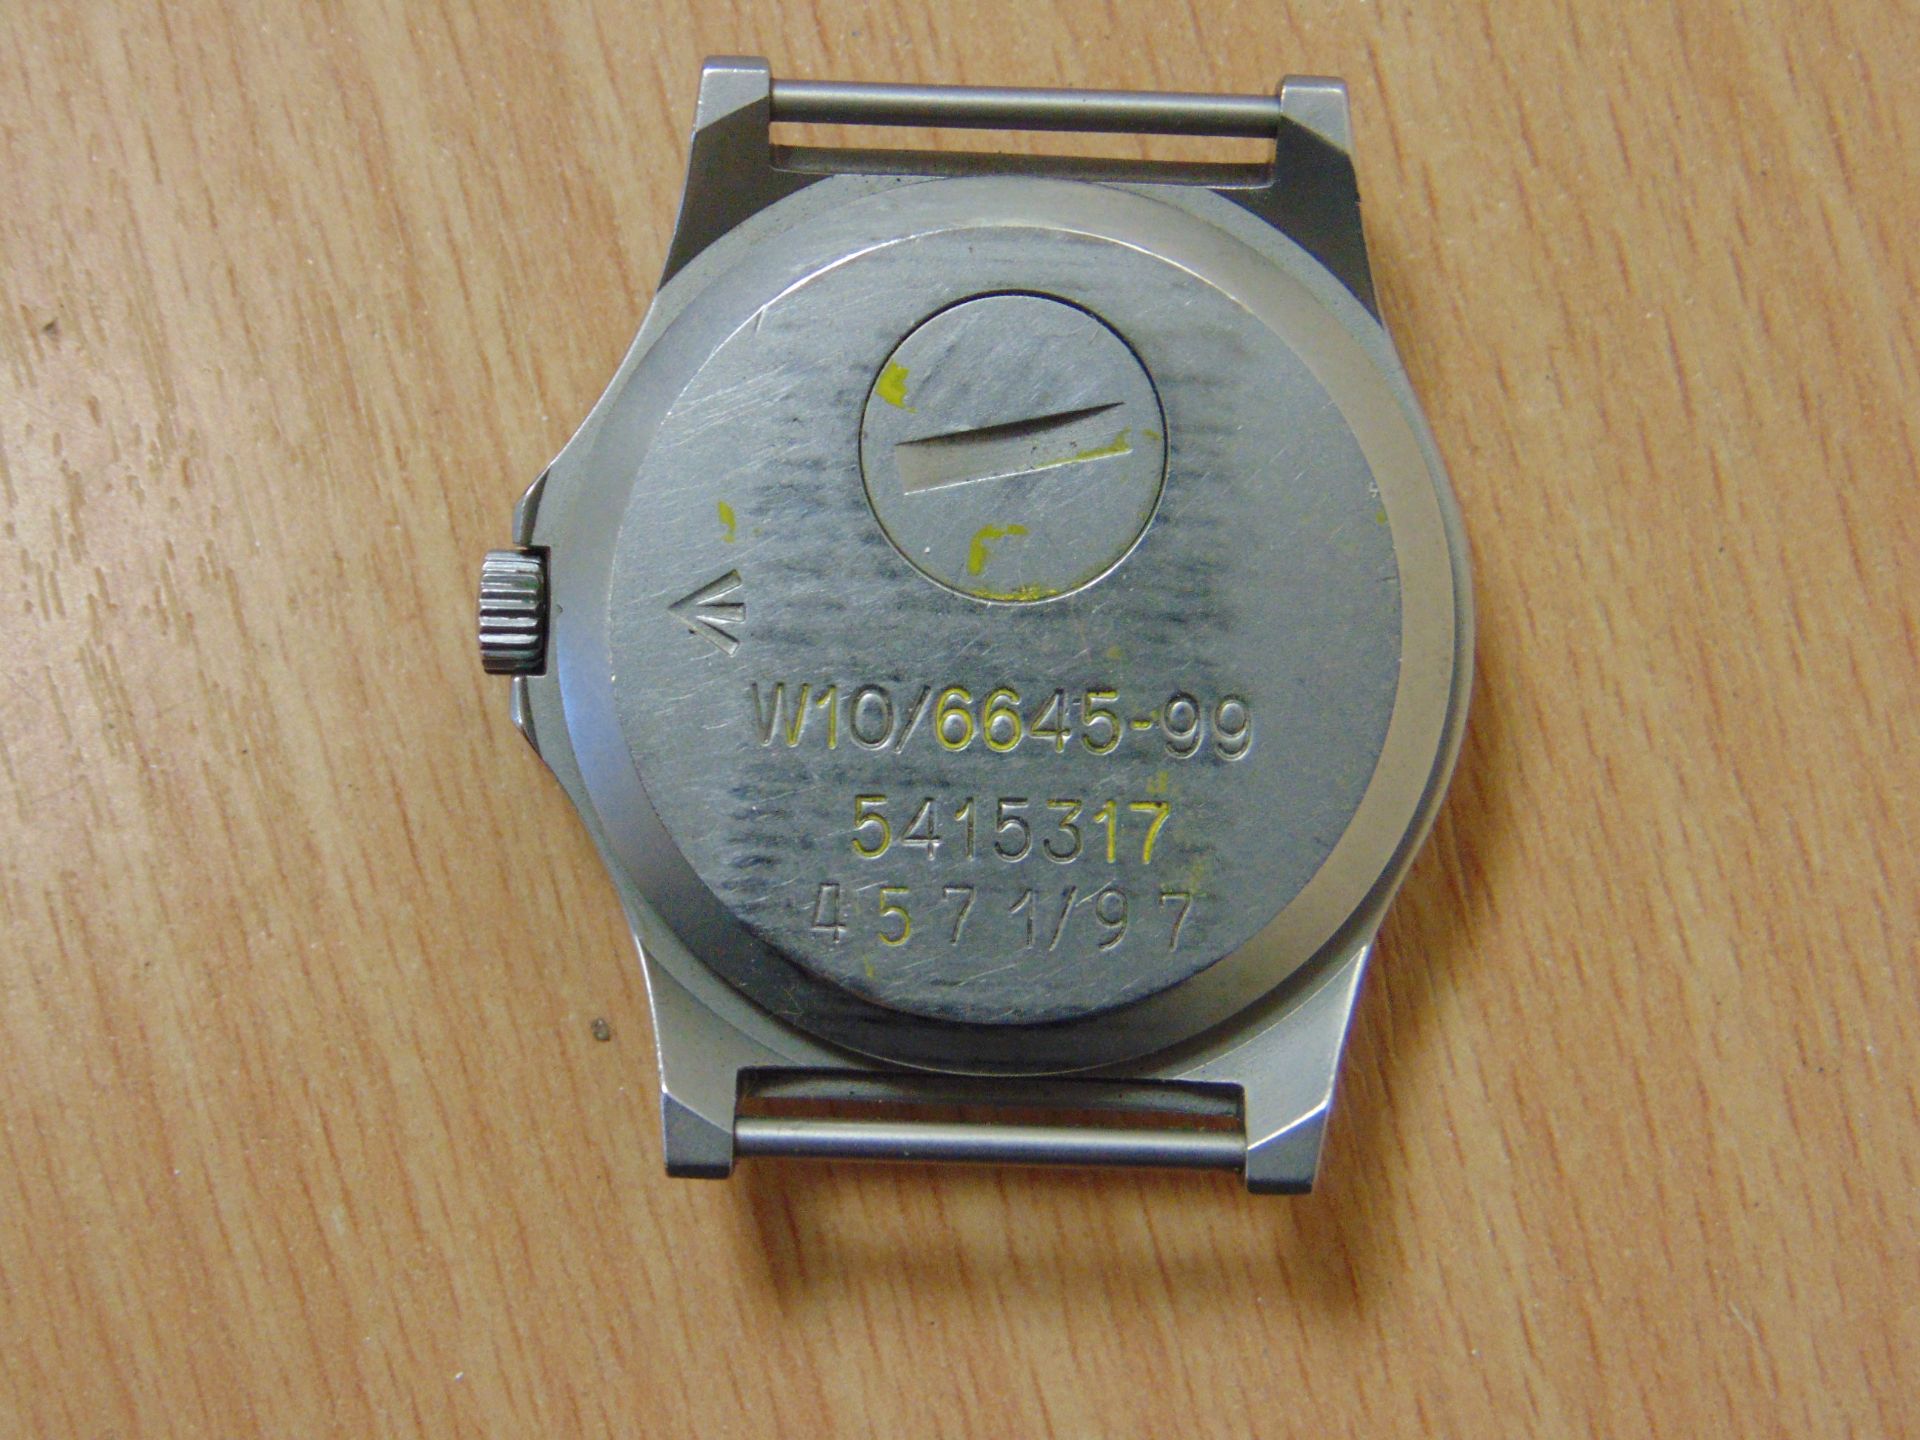 CWC W10 SERVICE WATCH NATO NUMBERS DATE 1997 - Image 7 of 7